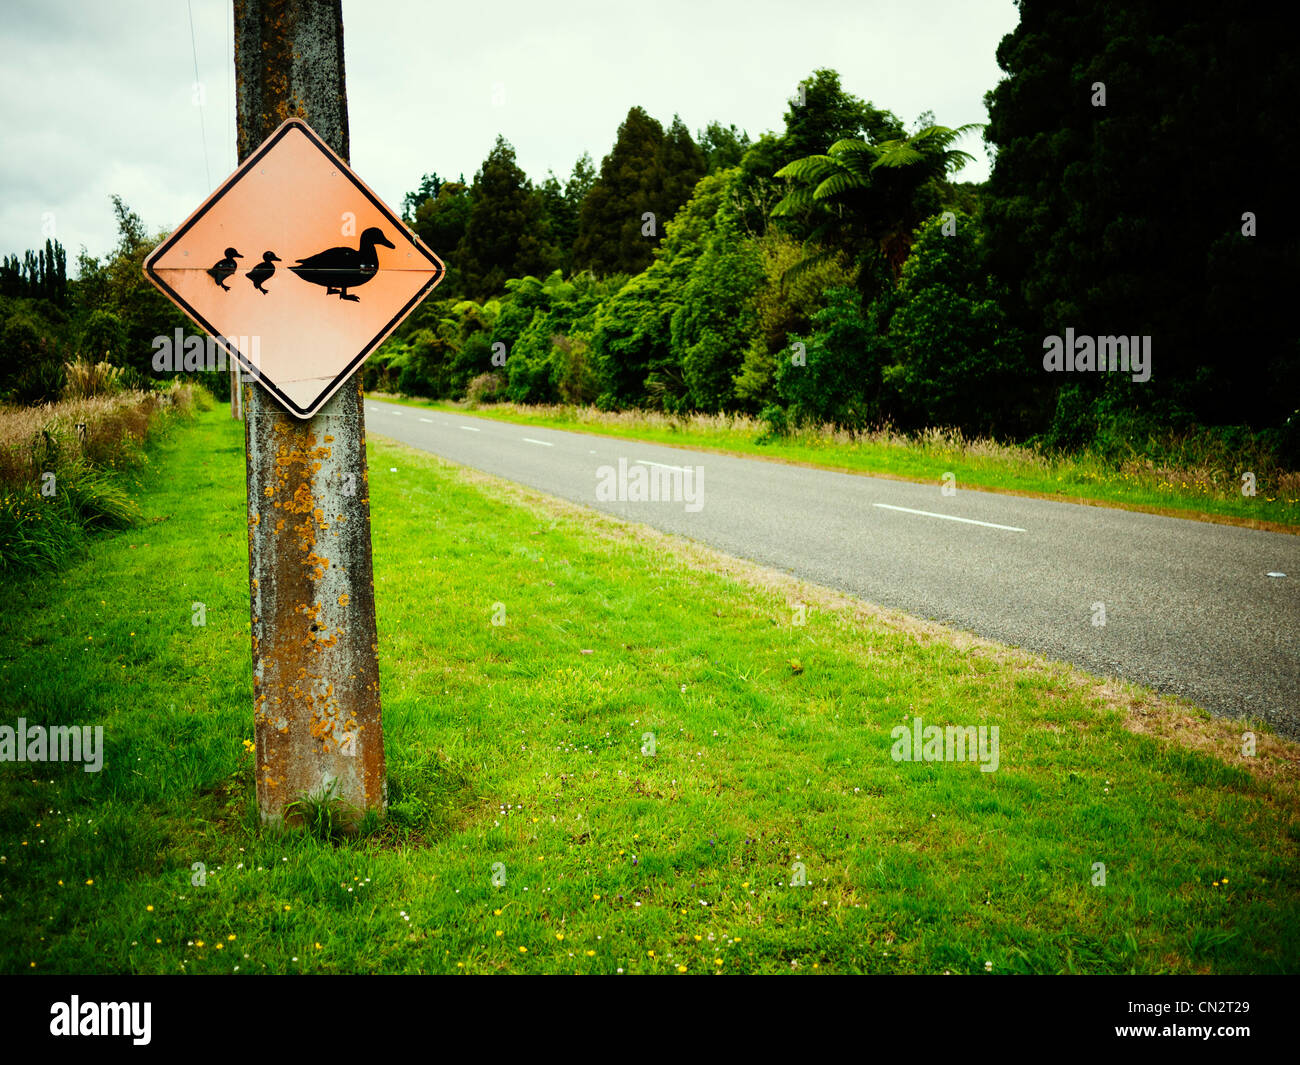 Beware mother duck and ducklings, road sign, New Zealand. Stock Photo